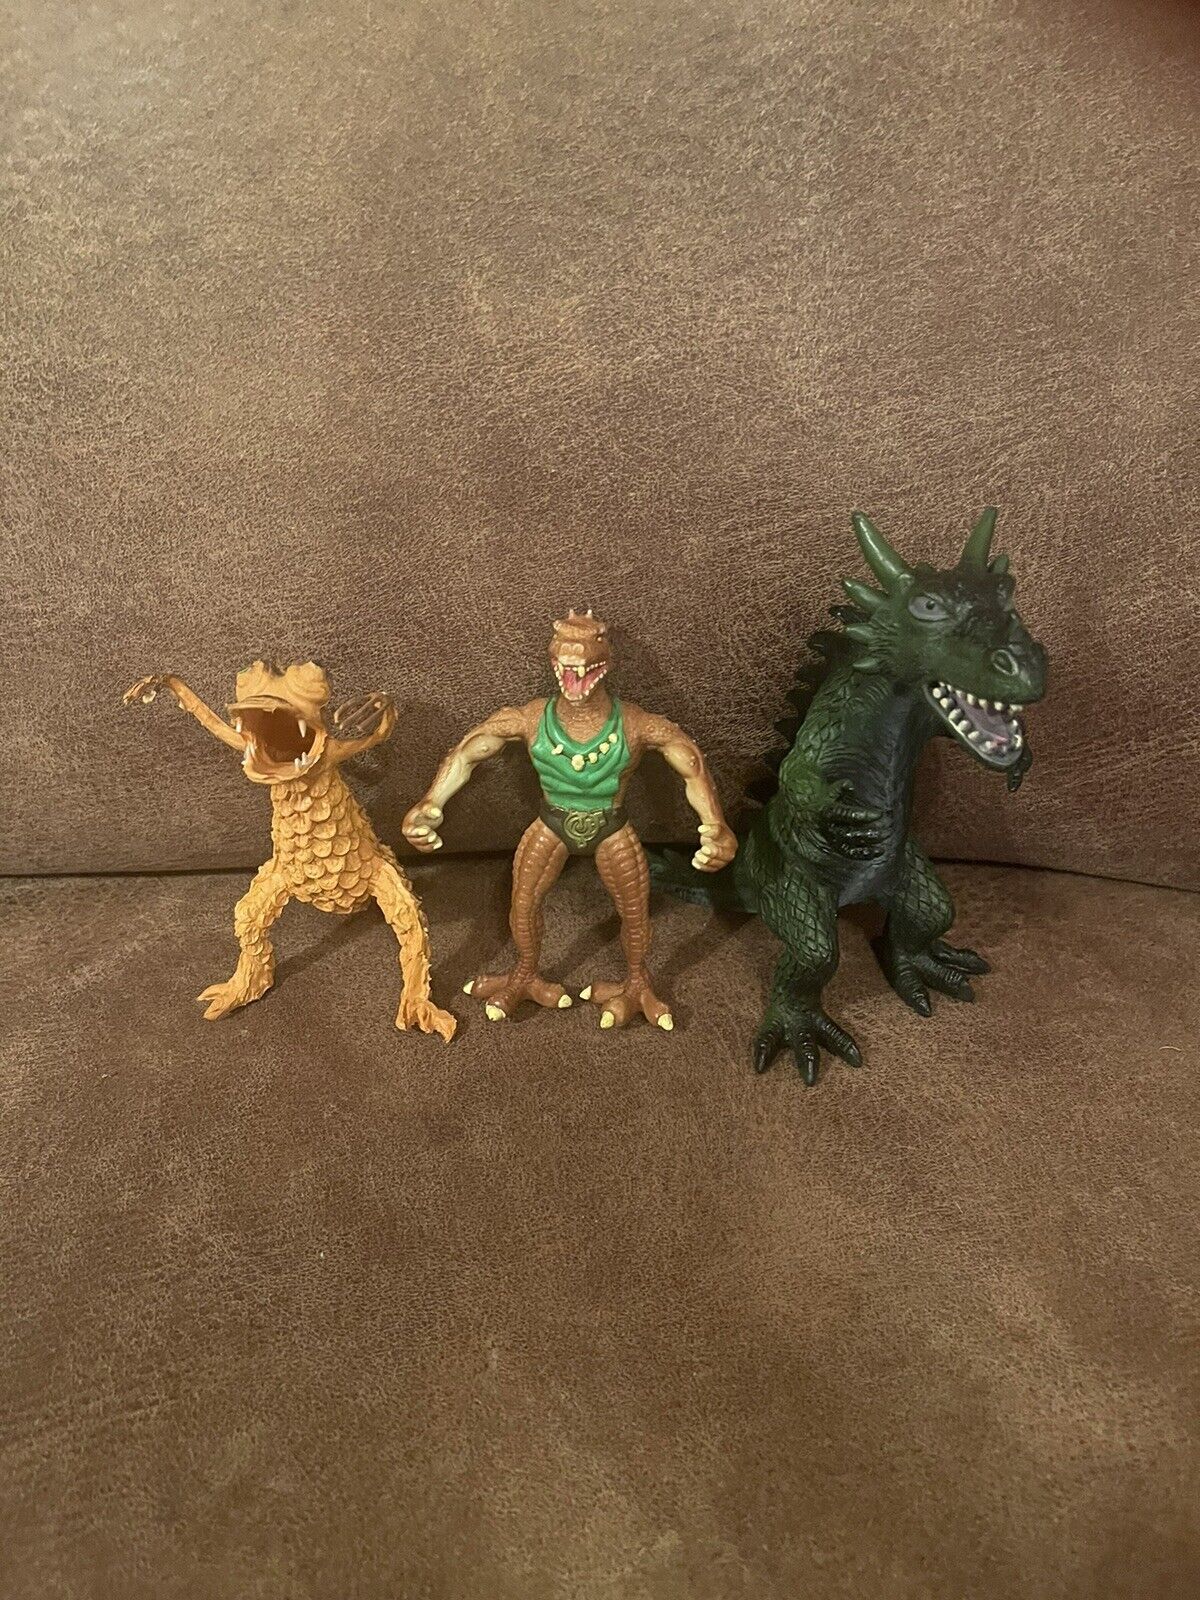 UGLY WUGGLIES WUGGLY MONSTER VINTAGE: Tarzan Vintage Monster Dragon Toy